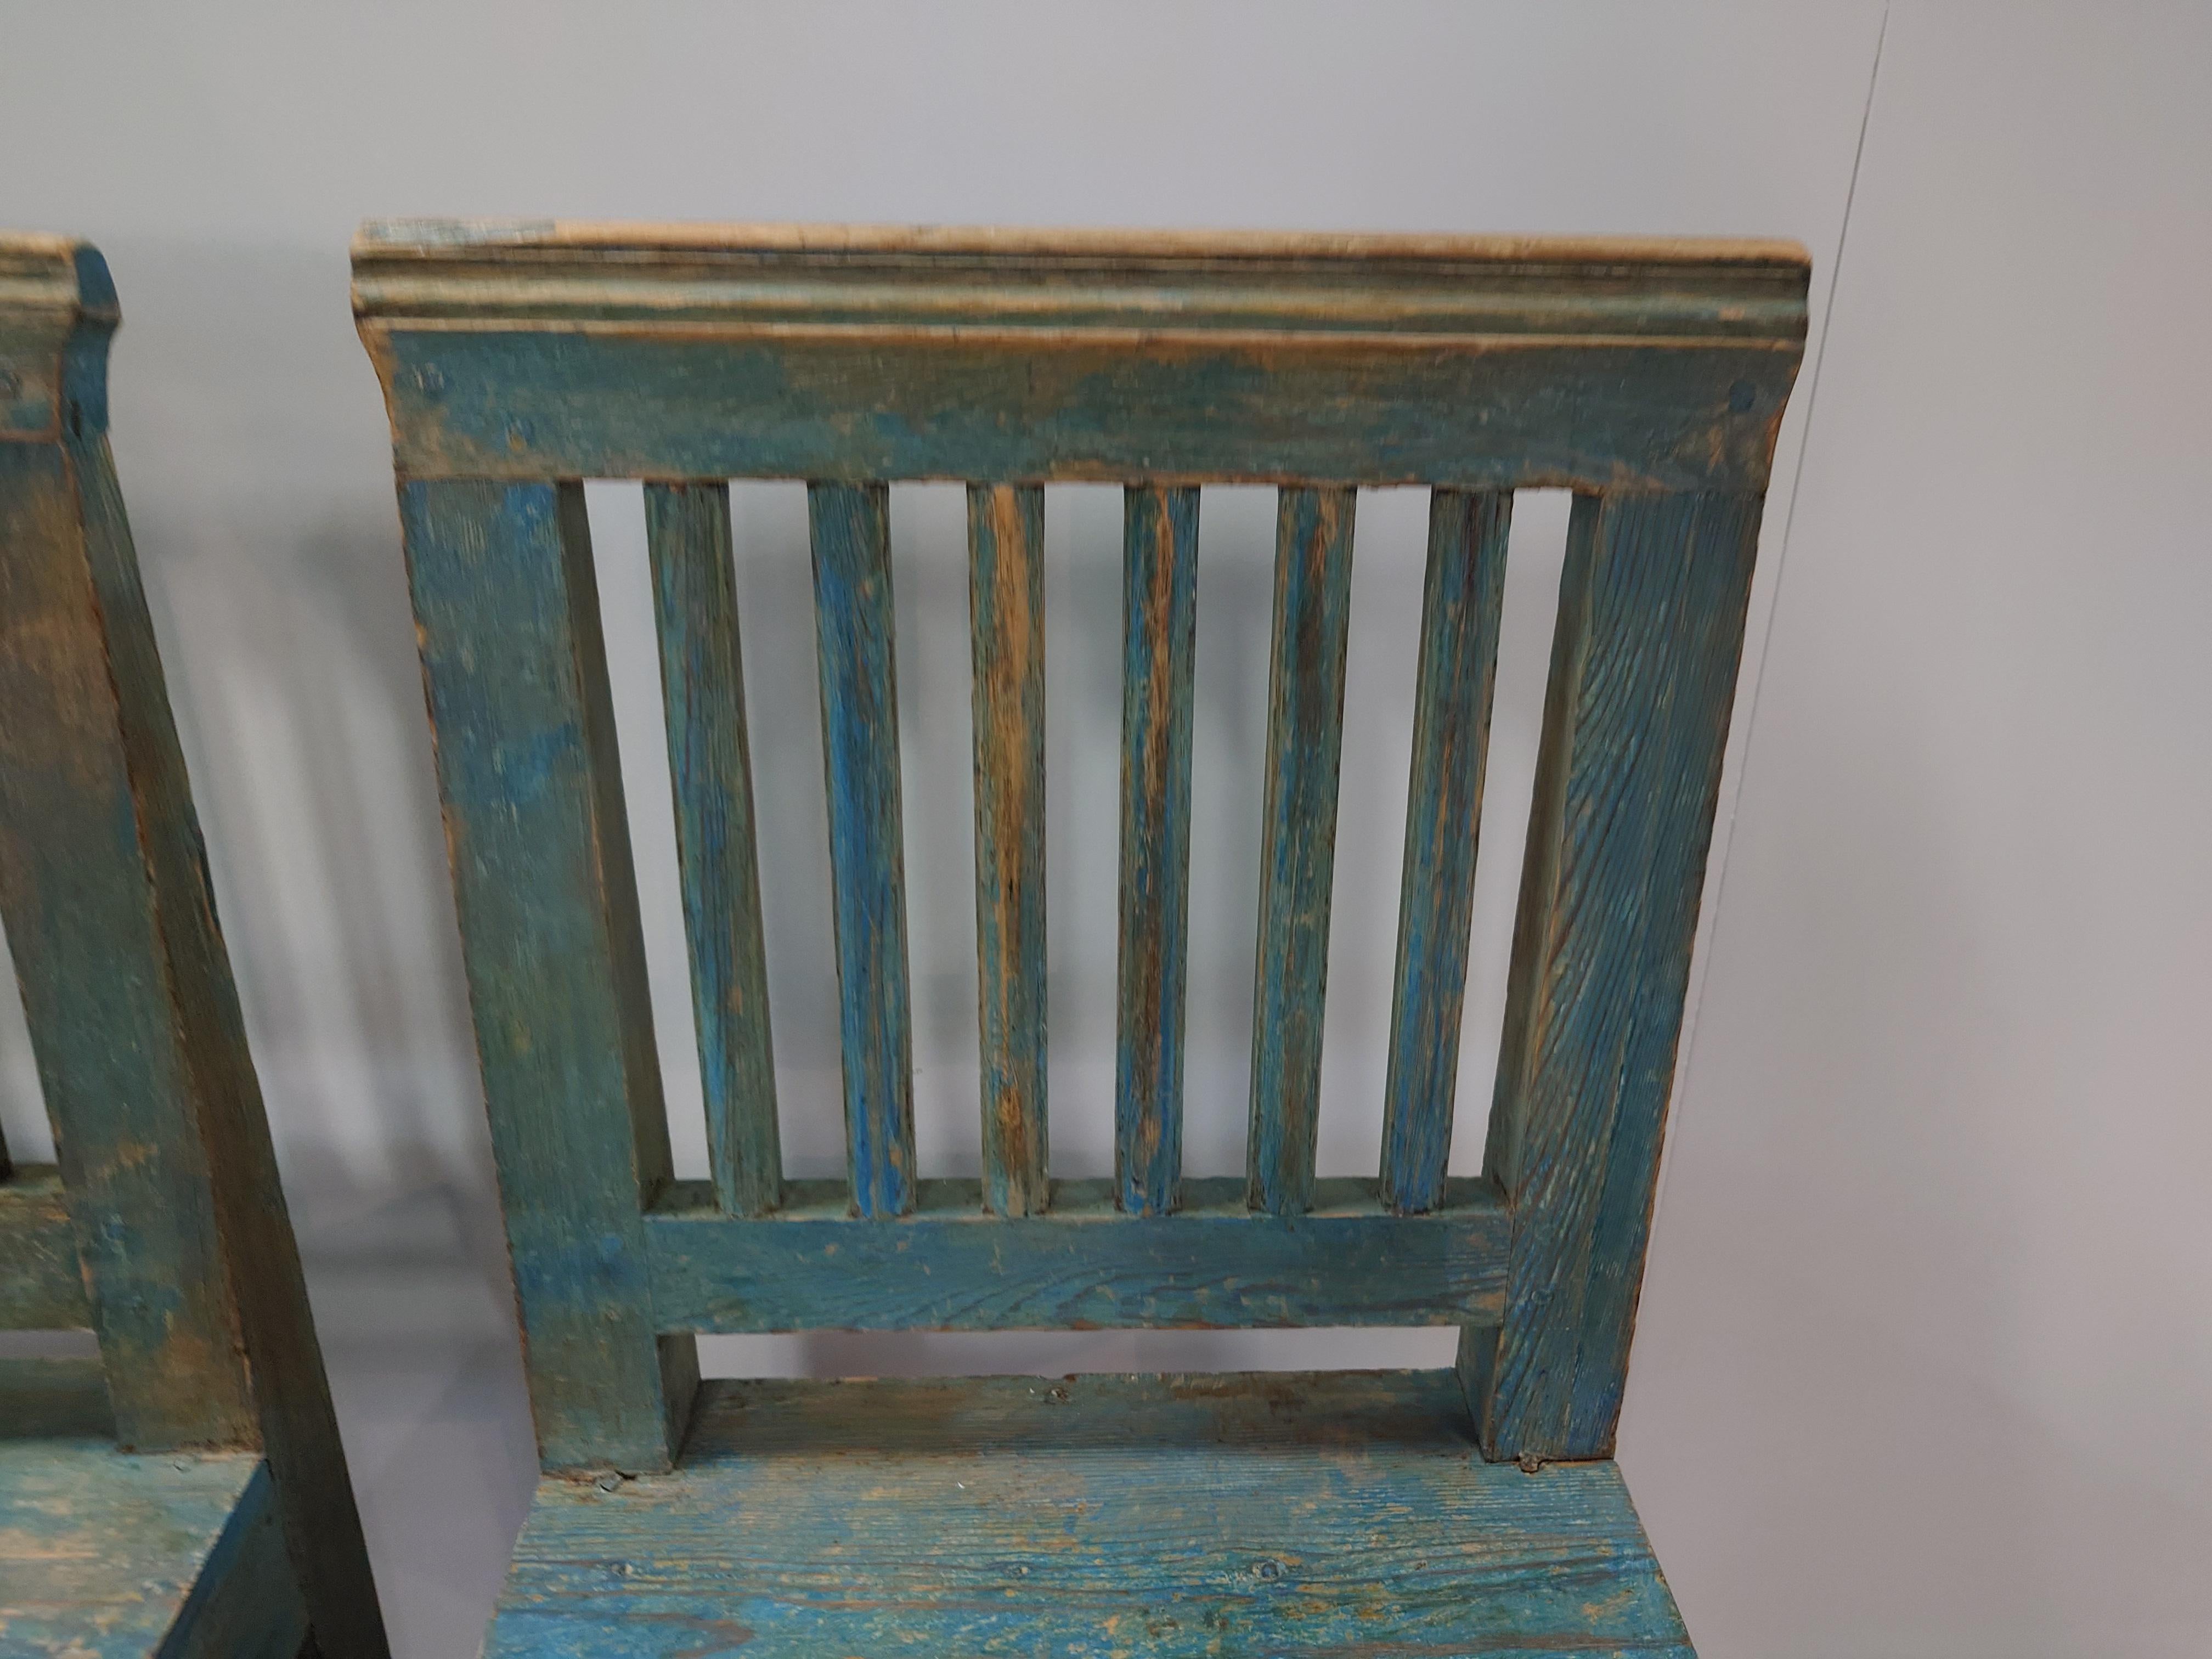  A pair of similar 19th century Swedish country chairs. Very slight difference  with great patina ,see pictures

Scraped by hand to its  beautiful blue original  color.
Such nice extra extra chairs to bring out to the guests or on each side of a